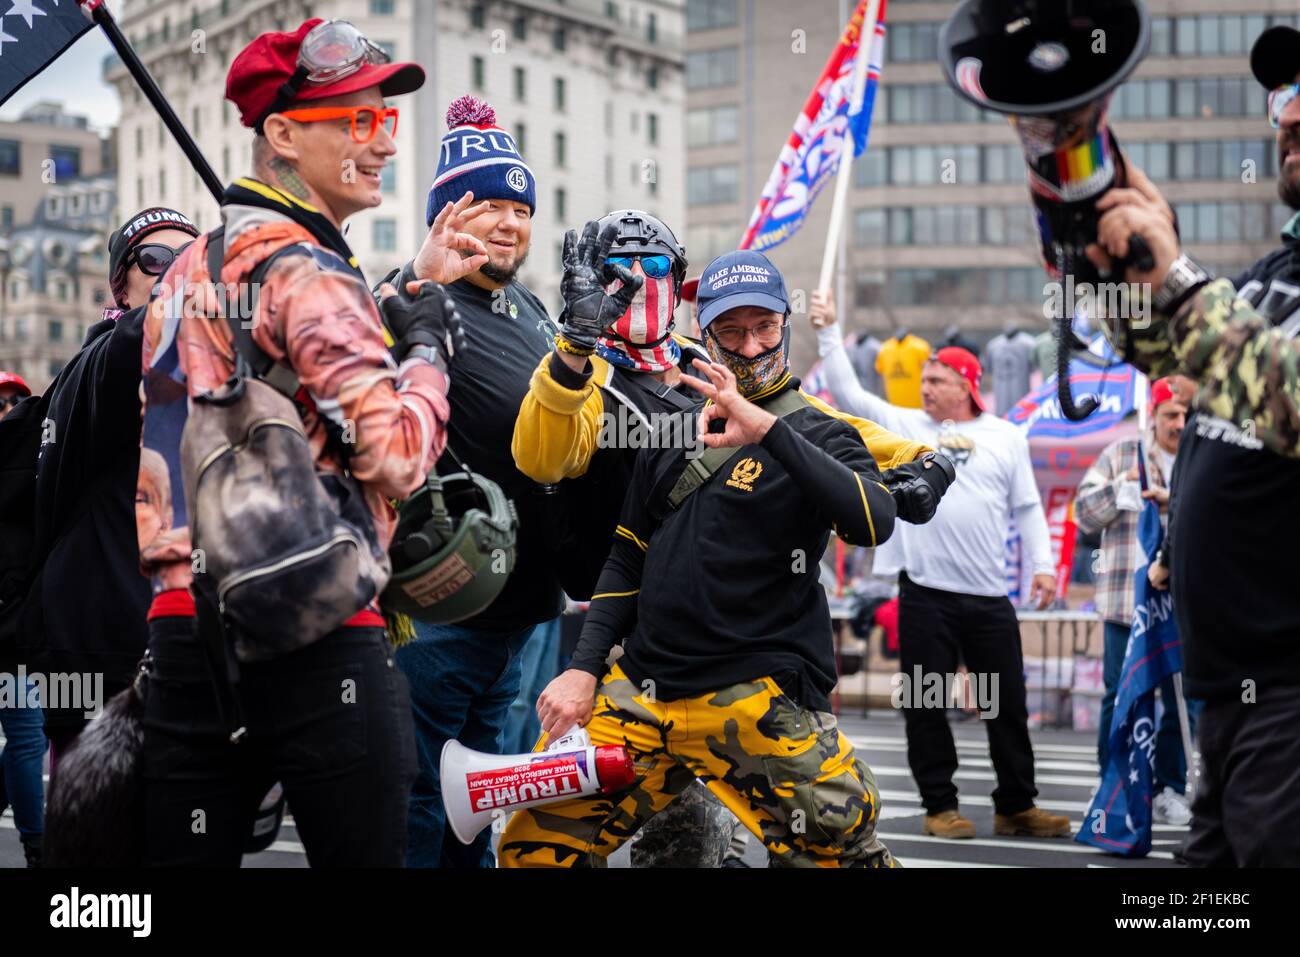 Die rechtsextreme Gruppe The Proud Boys nimmt am 12. Dezember 2020 in Washington, DC, an der Kundgebung "Stop the Steal" Teil. Stockfoto